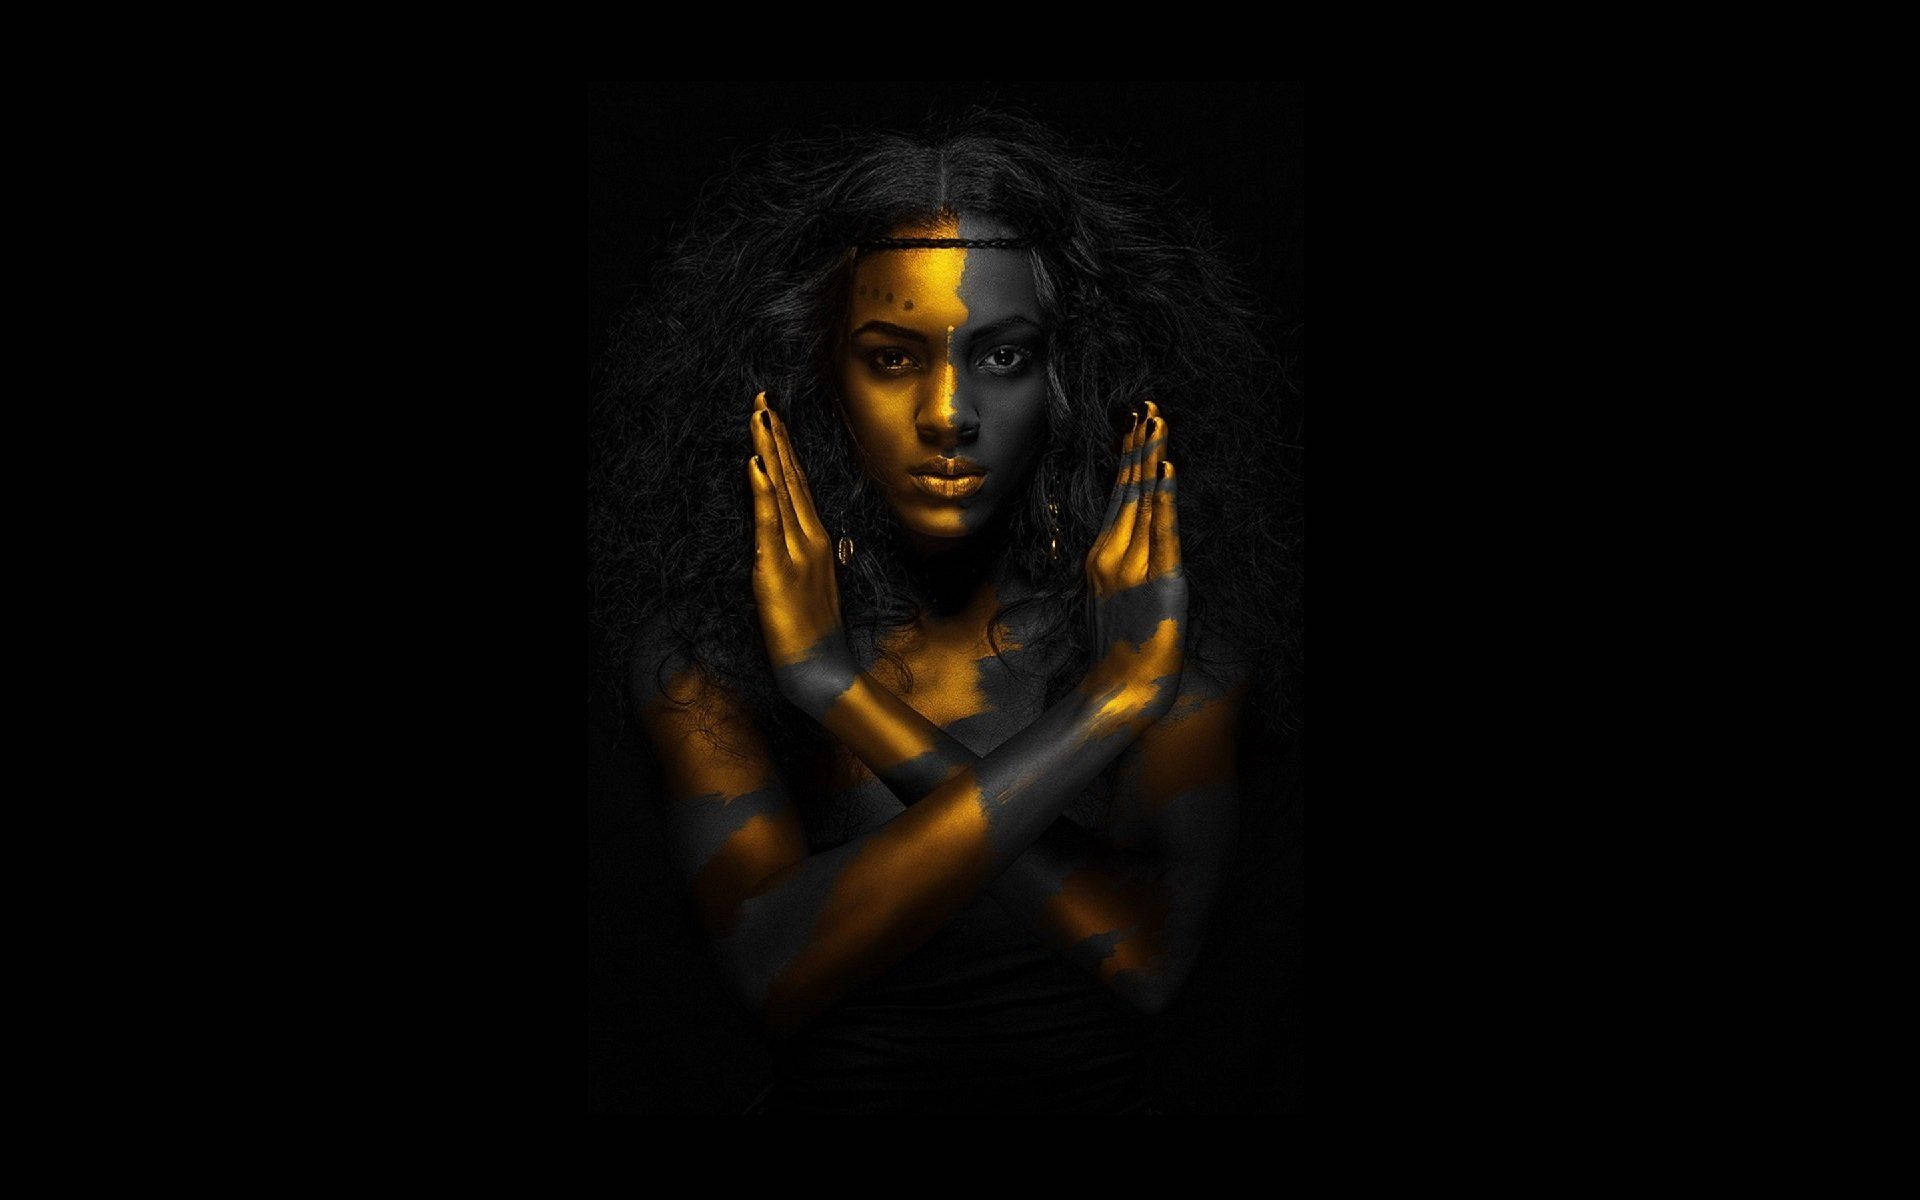 Warrior Black Woman With Gold And Charcoal Body Paint Wallpaper